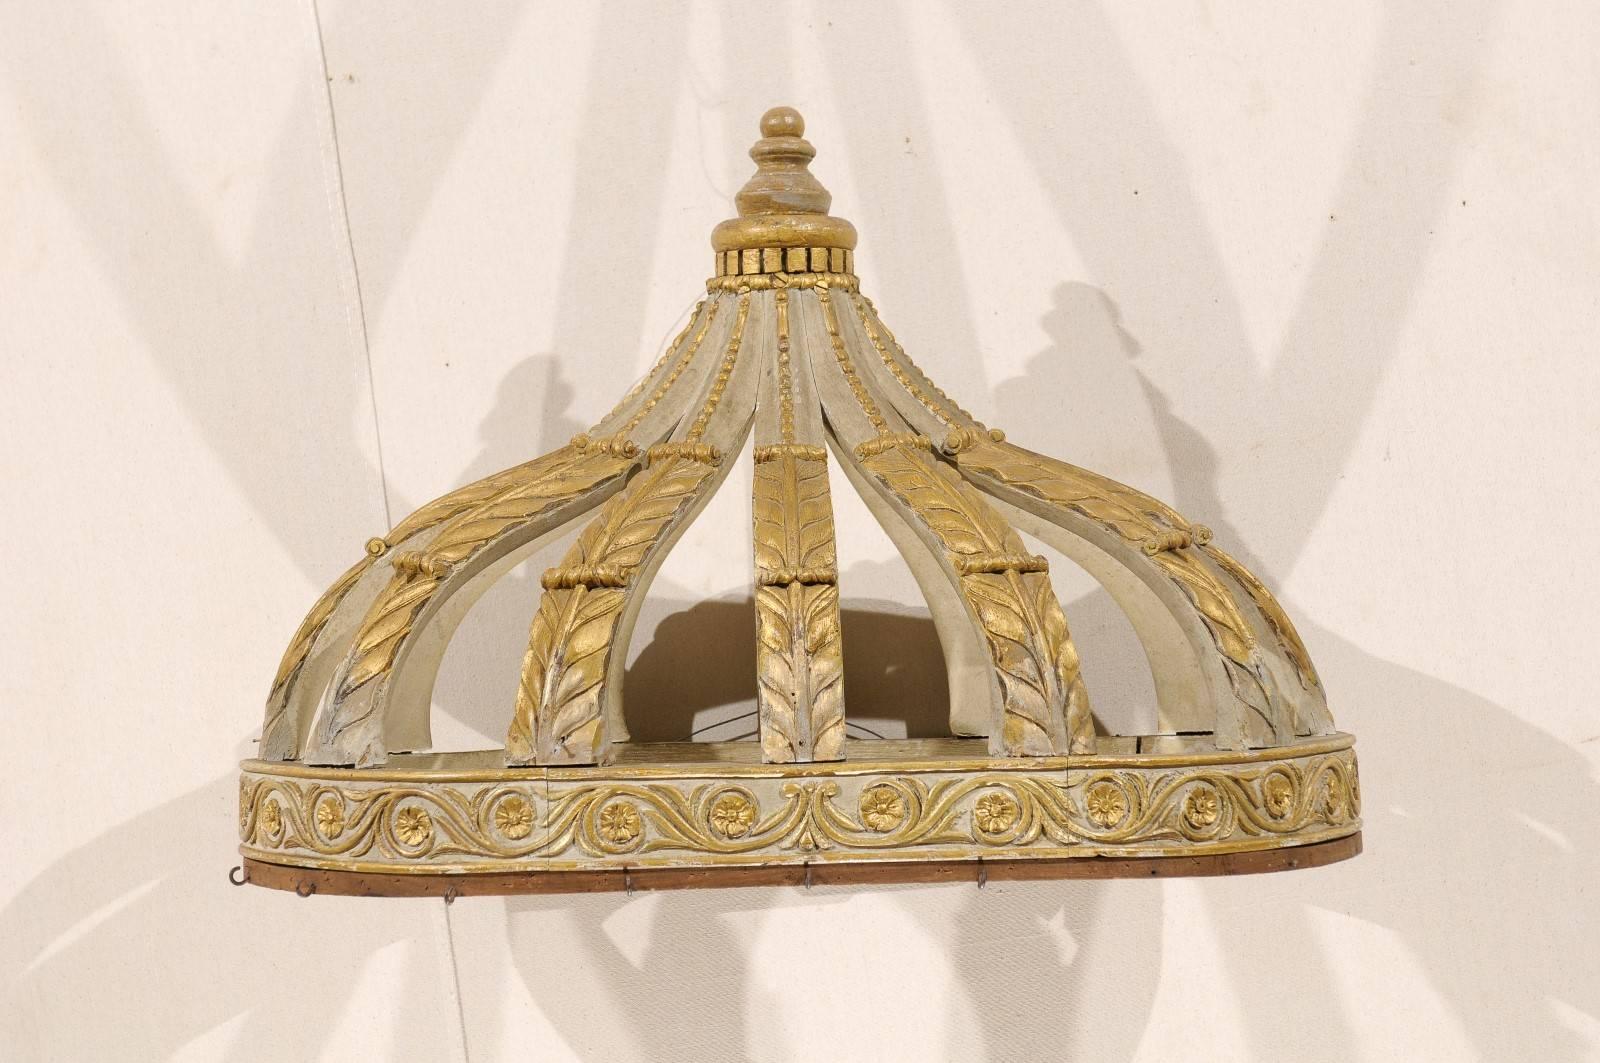 An Italian bed corona (bed crown). This early 20th century Italian wood bed corona is a nice grey-light green color accented in gold gilt and features floral and stylized acanthus carvings over a Rinceaux frieze. This piece could be hung above a bed